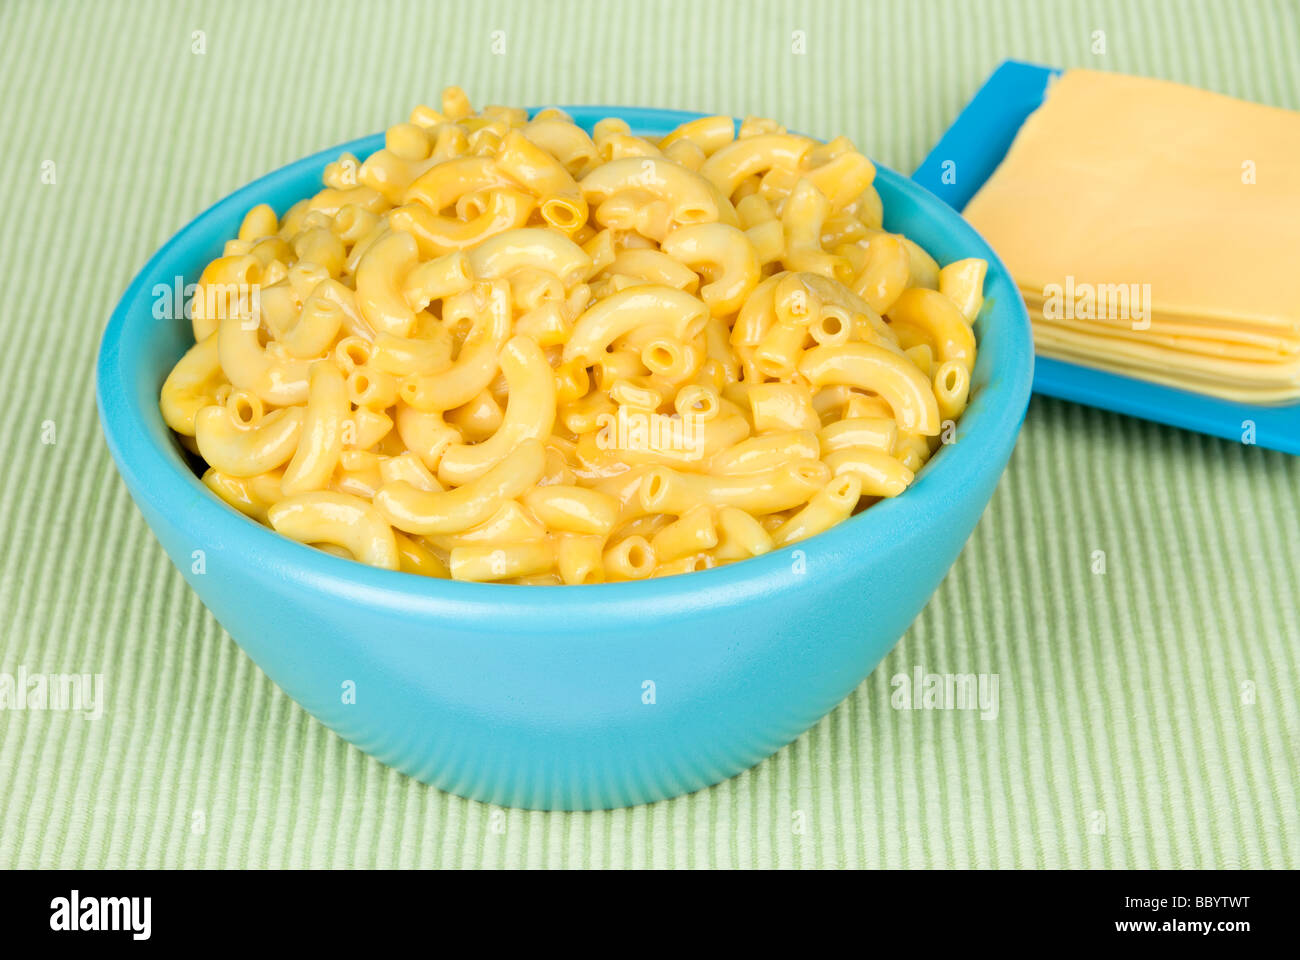 A bowl of hot macaroni and cheese with American cheese slices Stock Photo